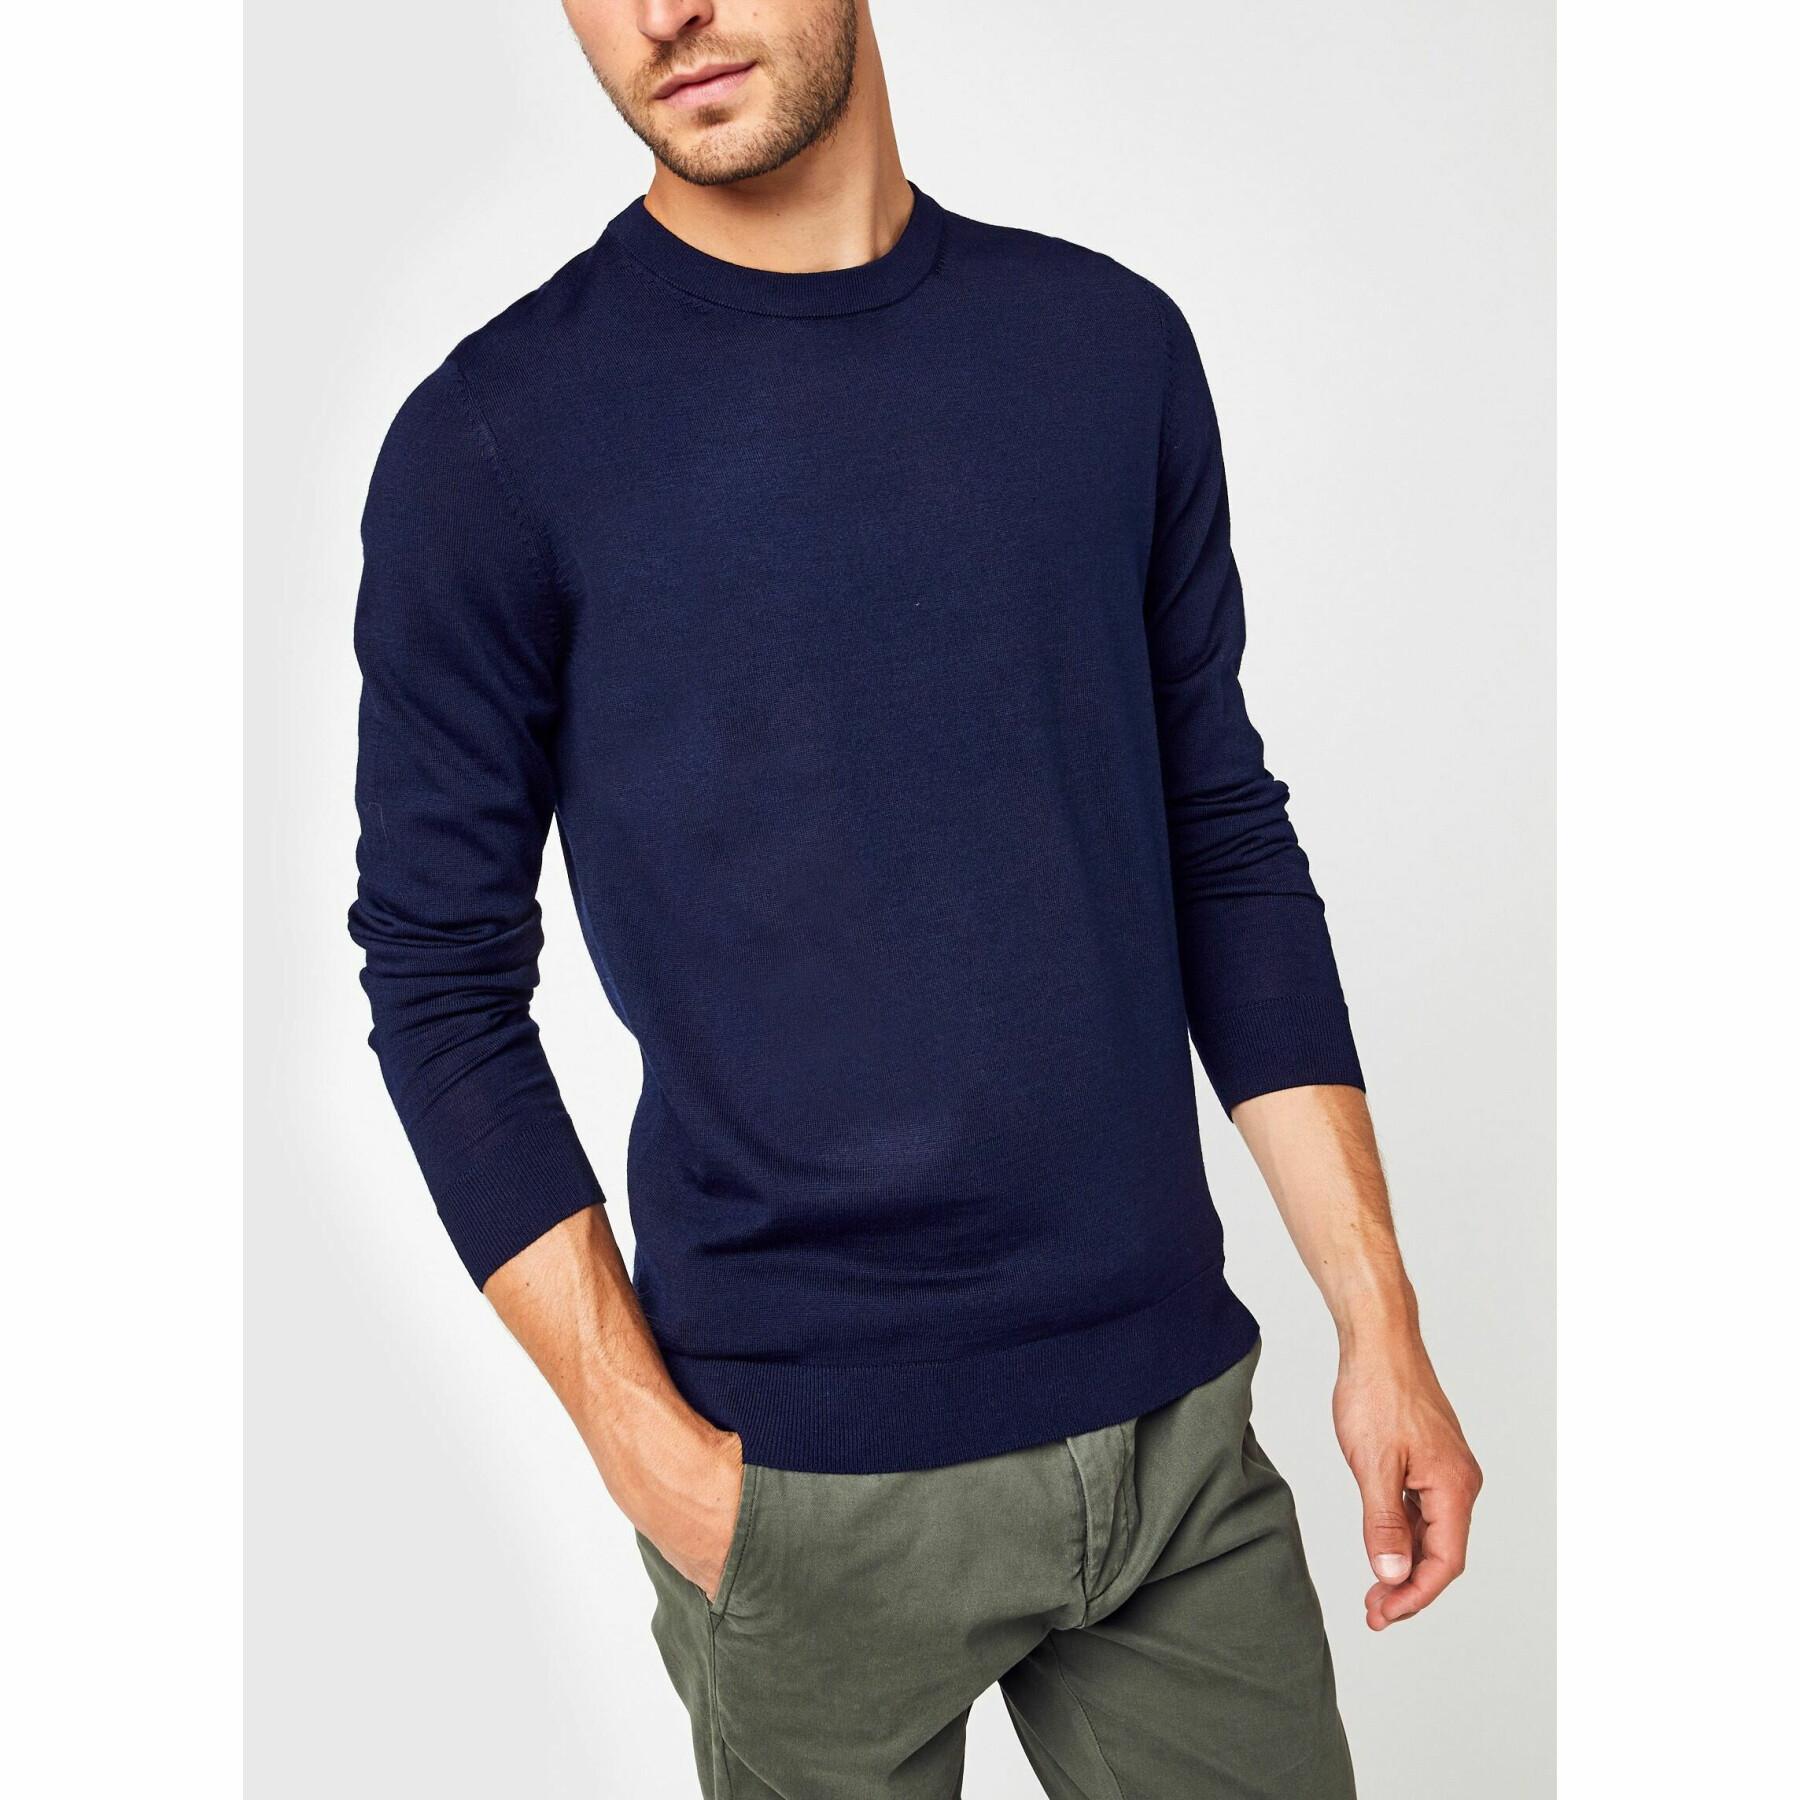 Sweater Selected Town merino coolmax knit col rond